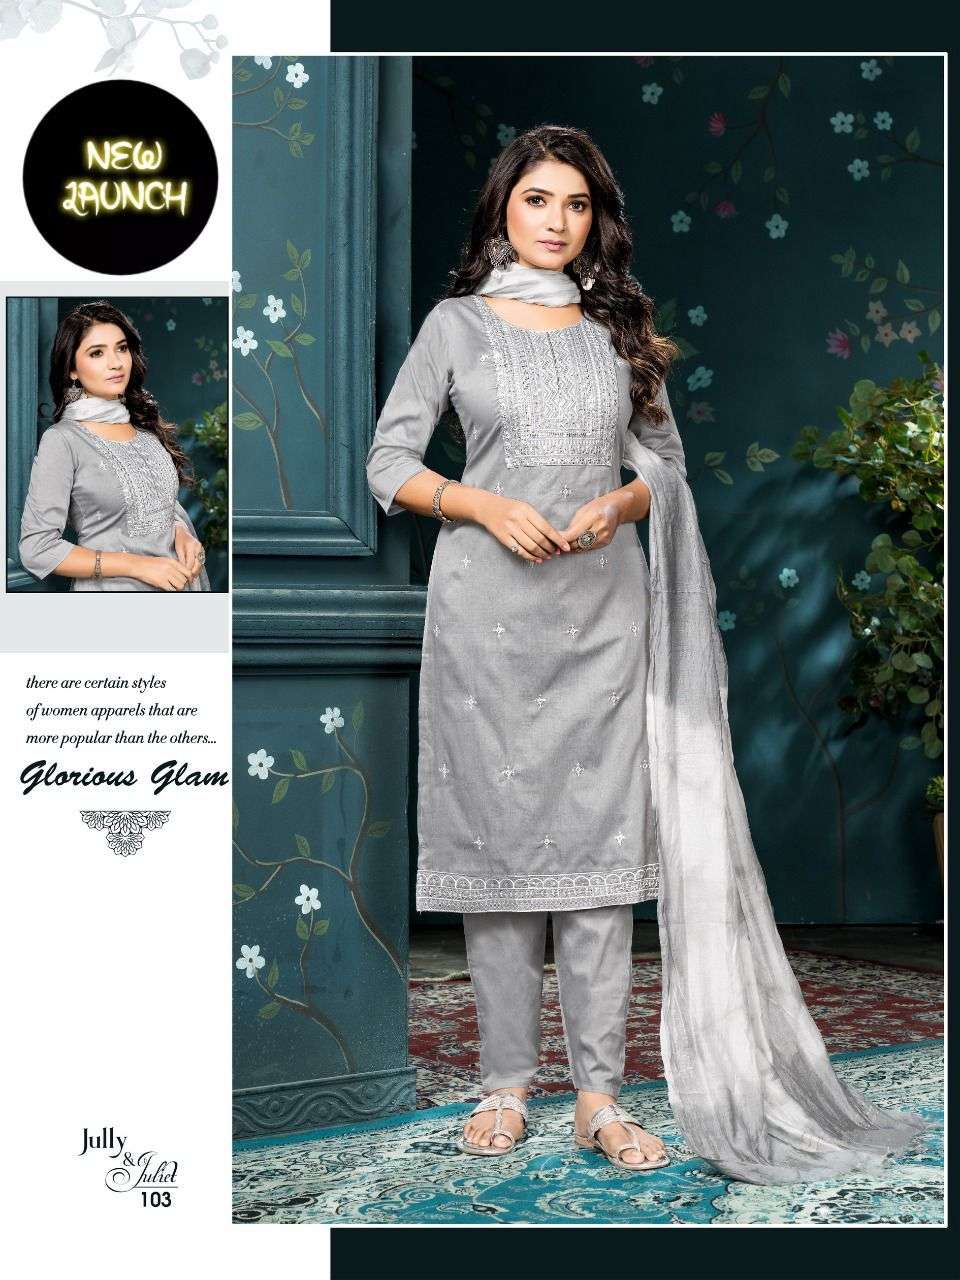 S3forever jully%20And%20Juliet fabric silk embroidery work white foil print kurti silk fabric fancy pant chiffon double dying dupatta 02 1 2022 10 15 16 21 51